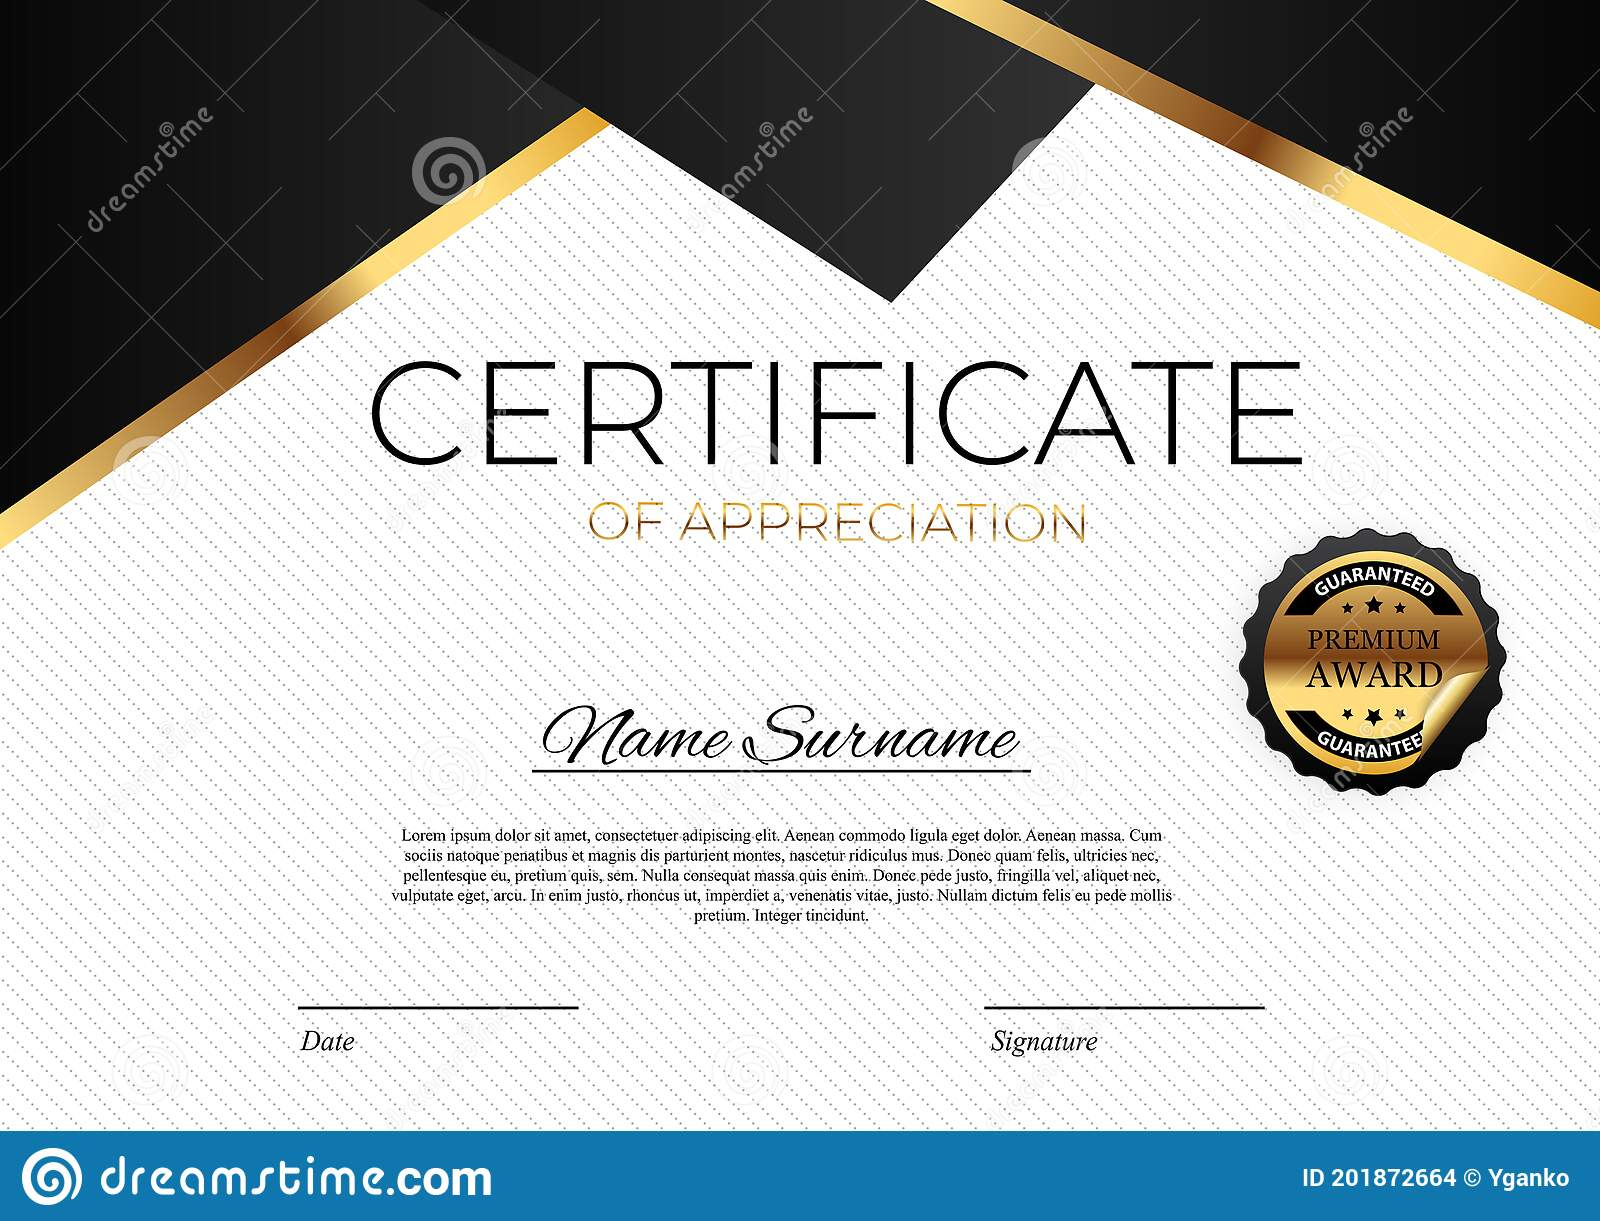 High Resolution Certificate Template with regard to High Resolution Certificate Template